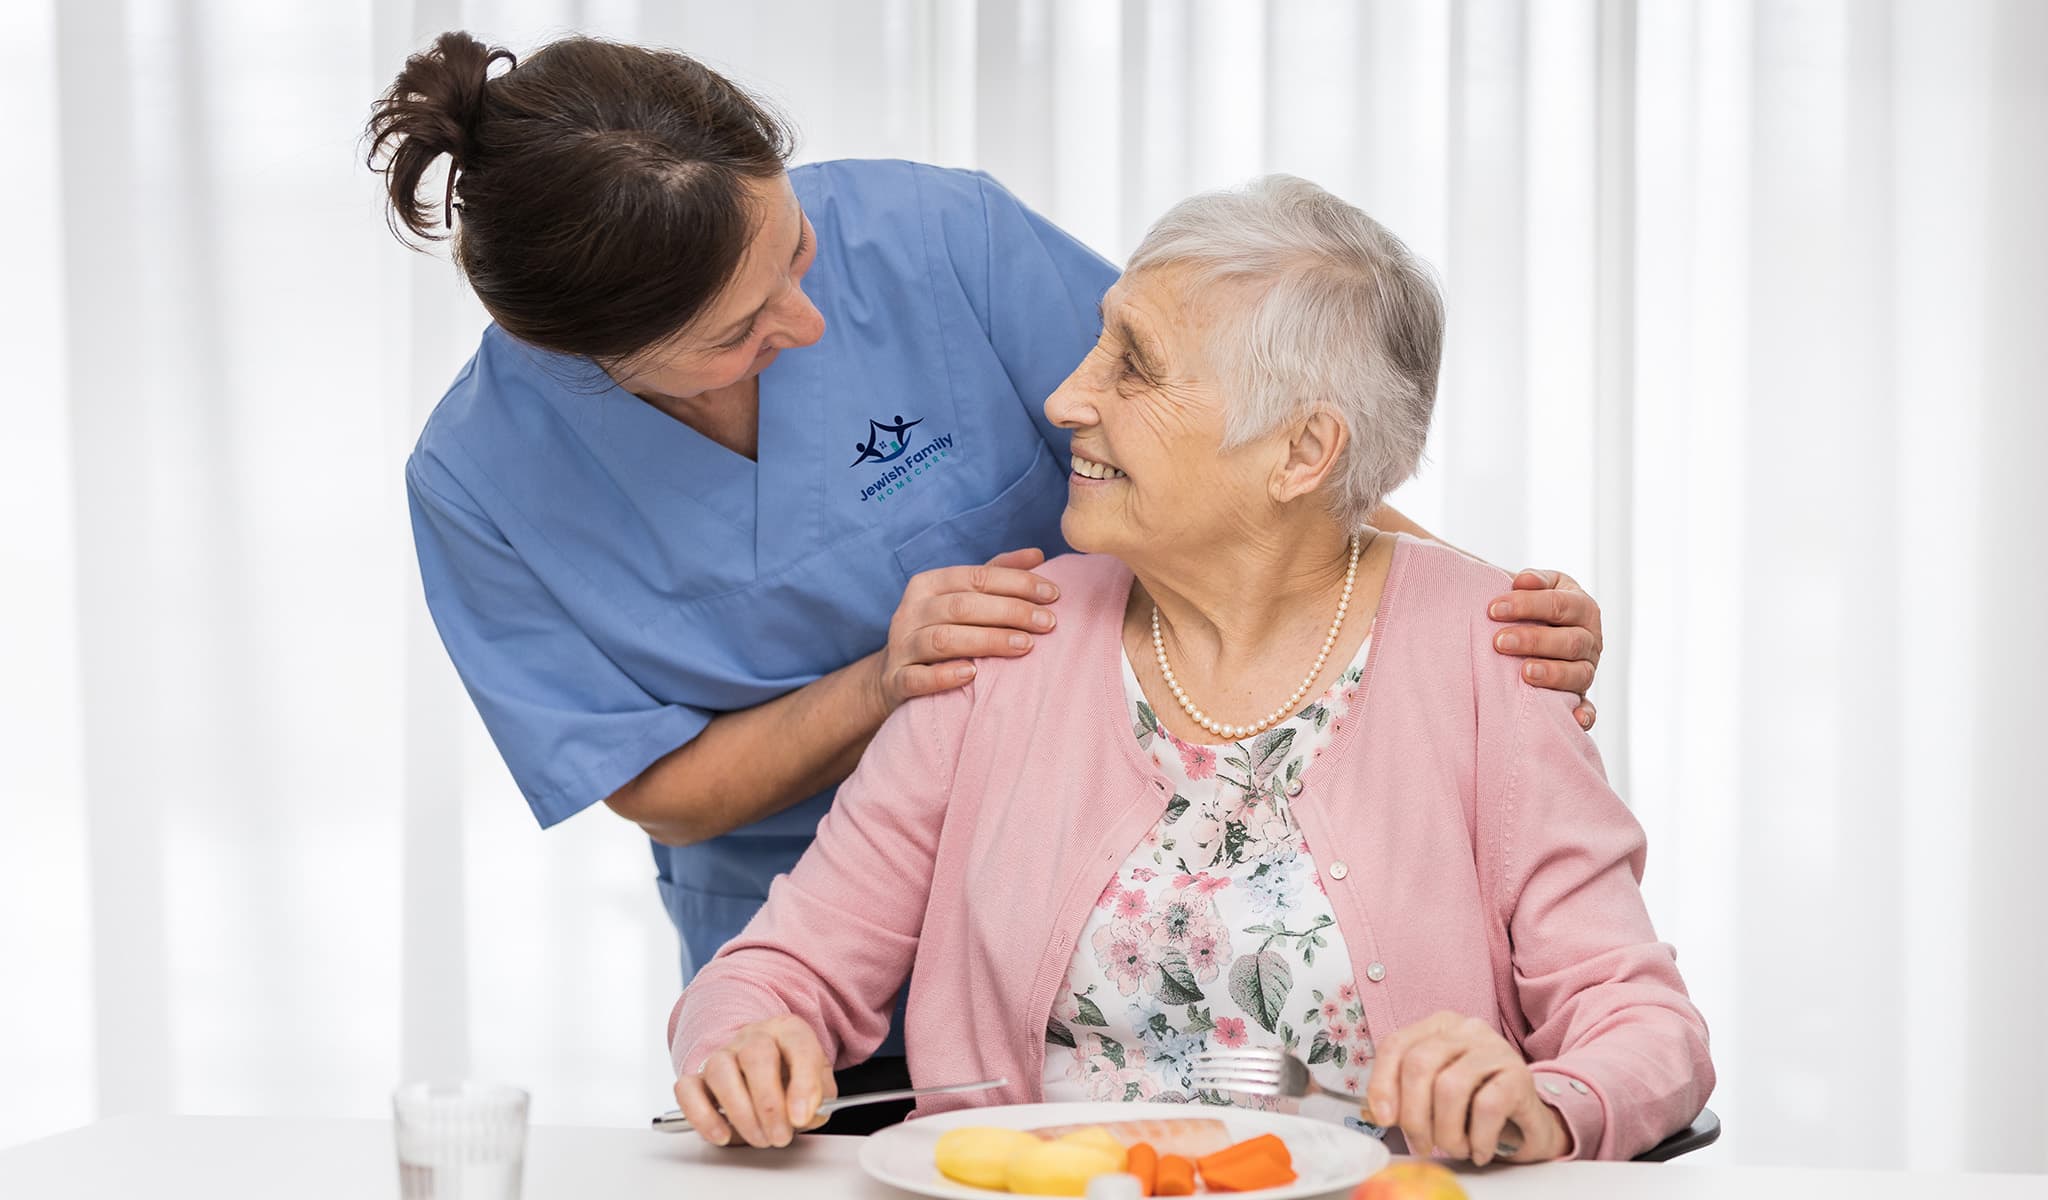 Caregiver and client at mealtime